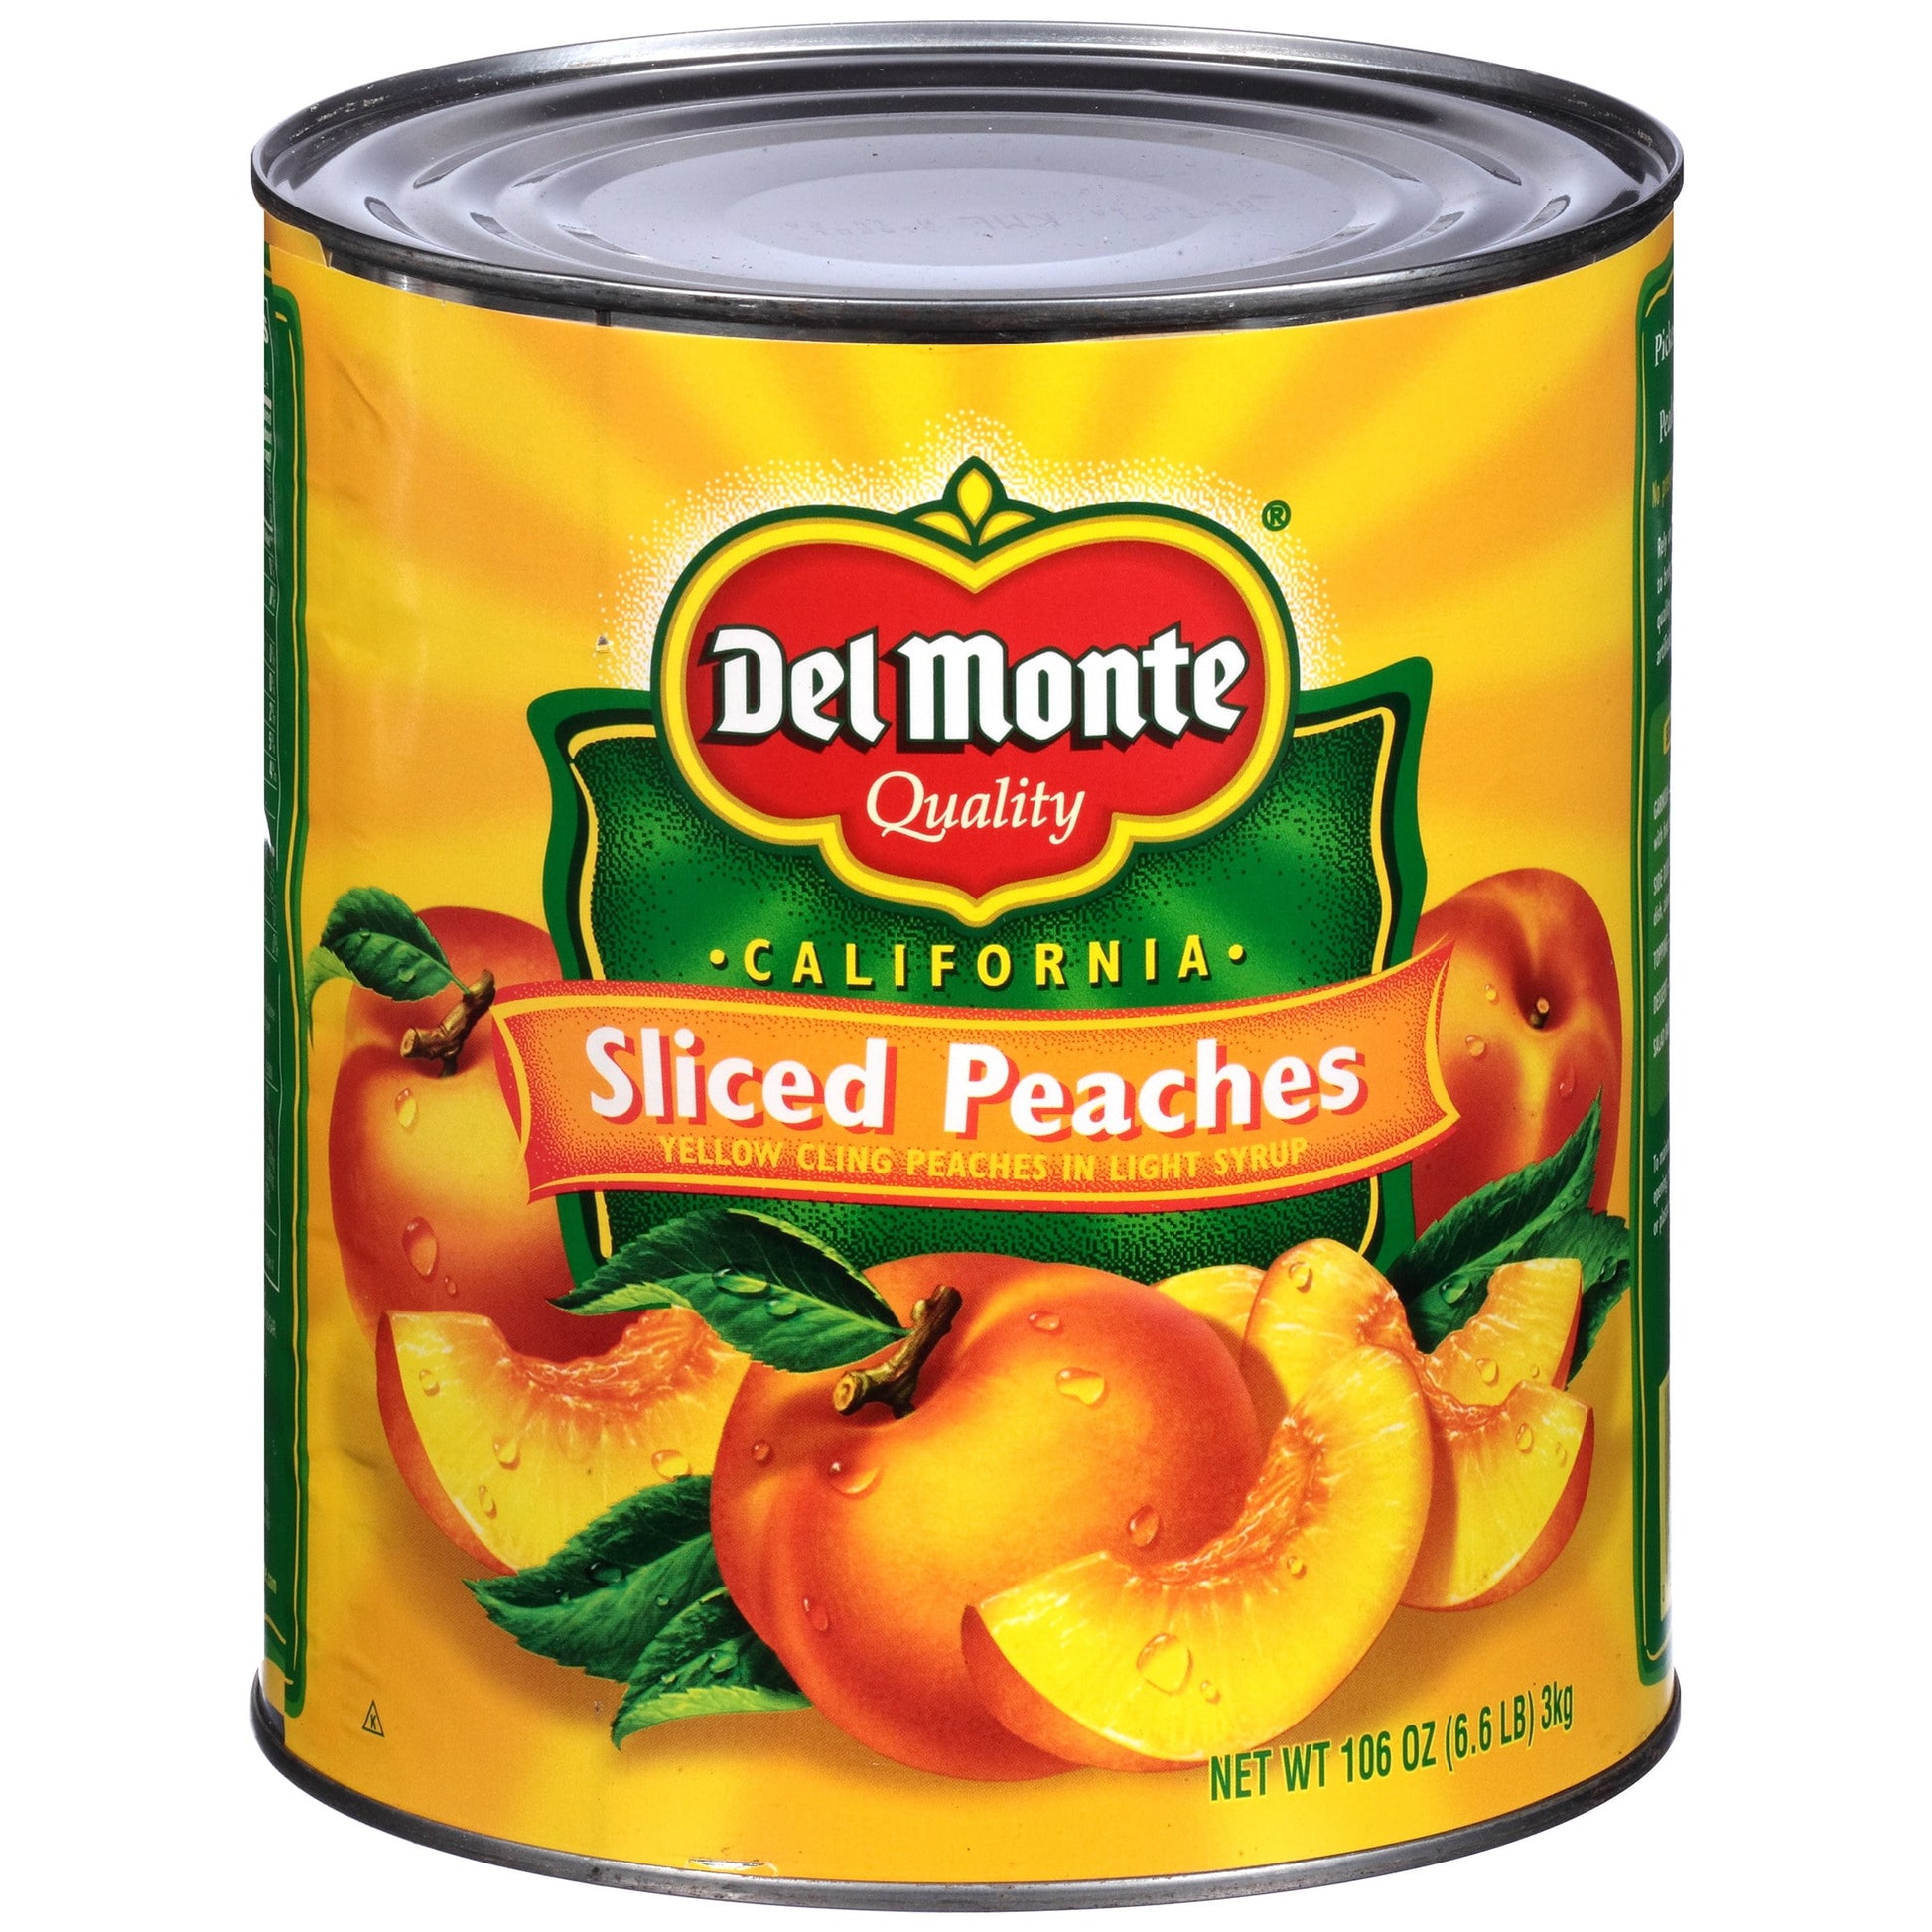 Lite Yellow Cling Sliced Peaches, Canned Fruit, 106 Oz Can